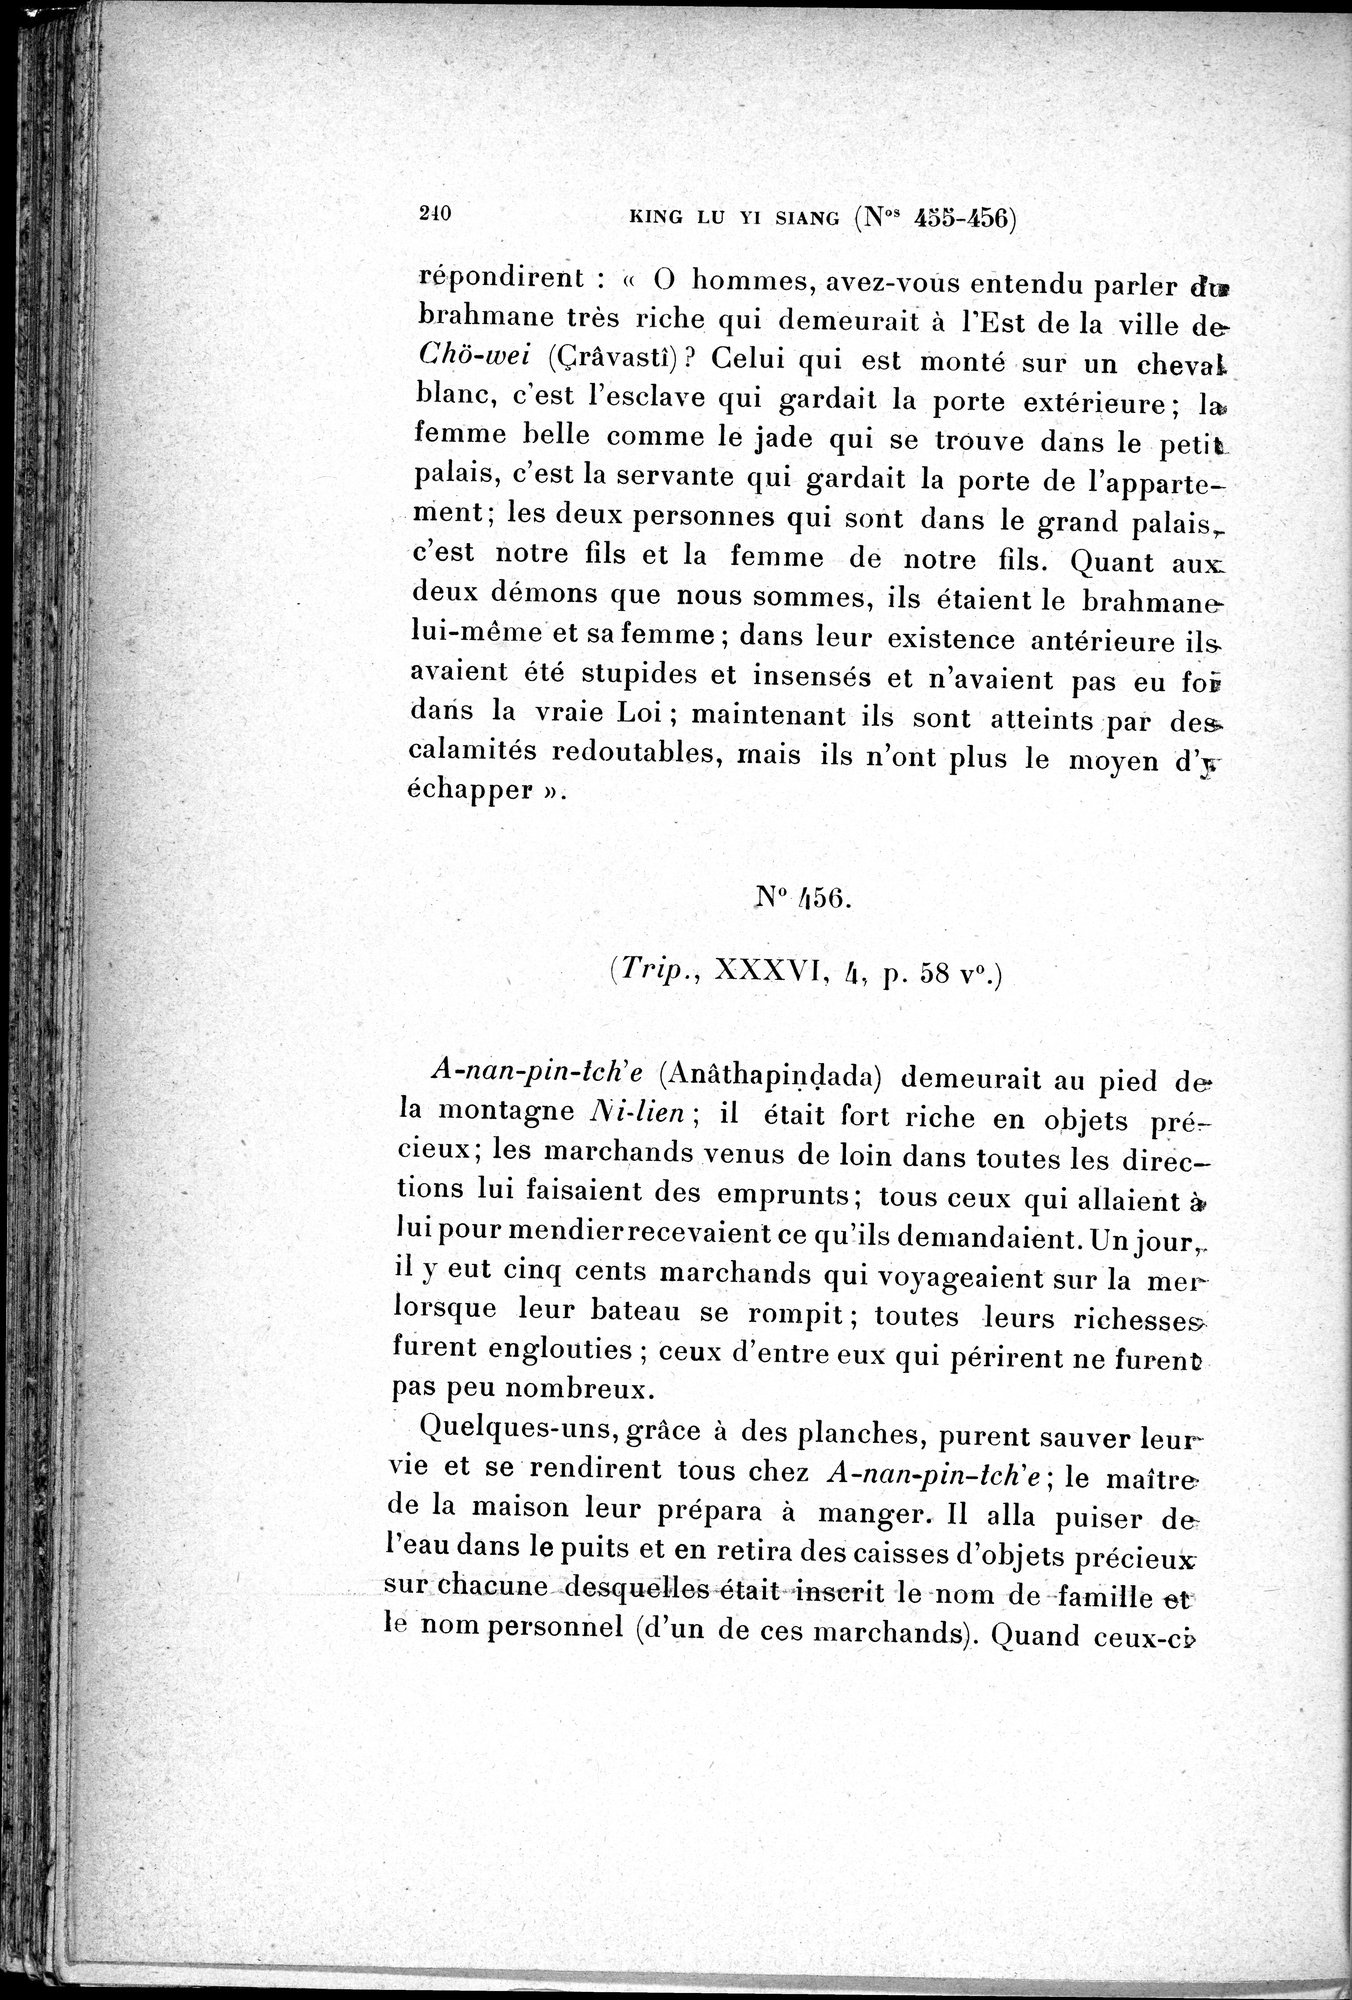 Cinq Cents Contes et Apologues : vol.3 / Page 254 (Grayscale High Resolution Image)